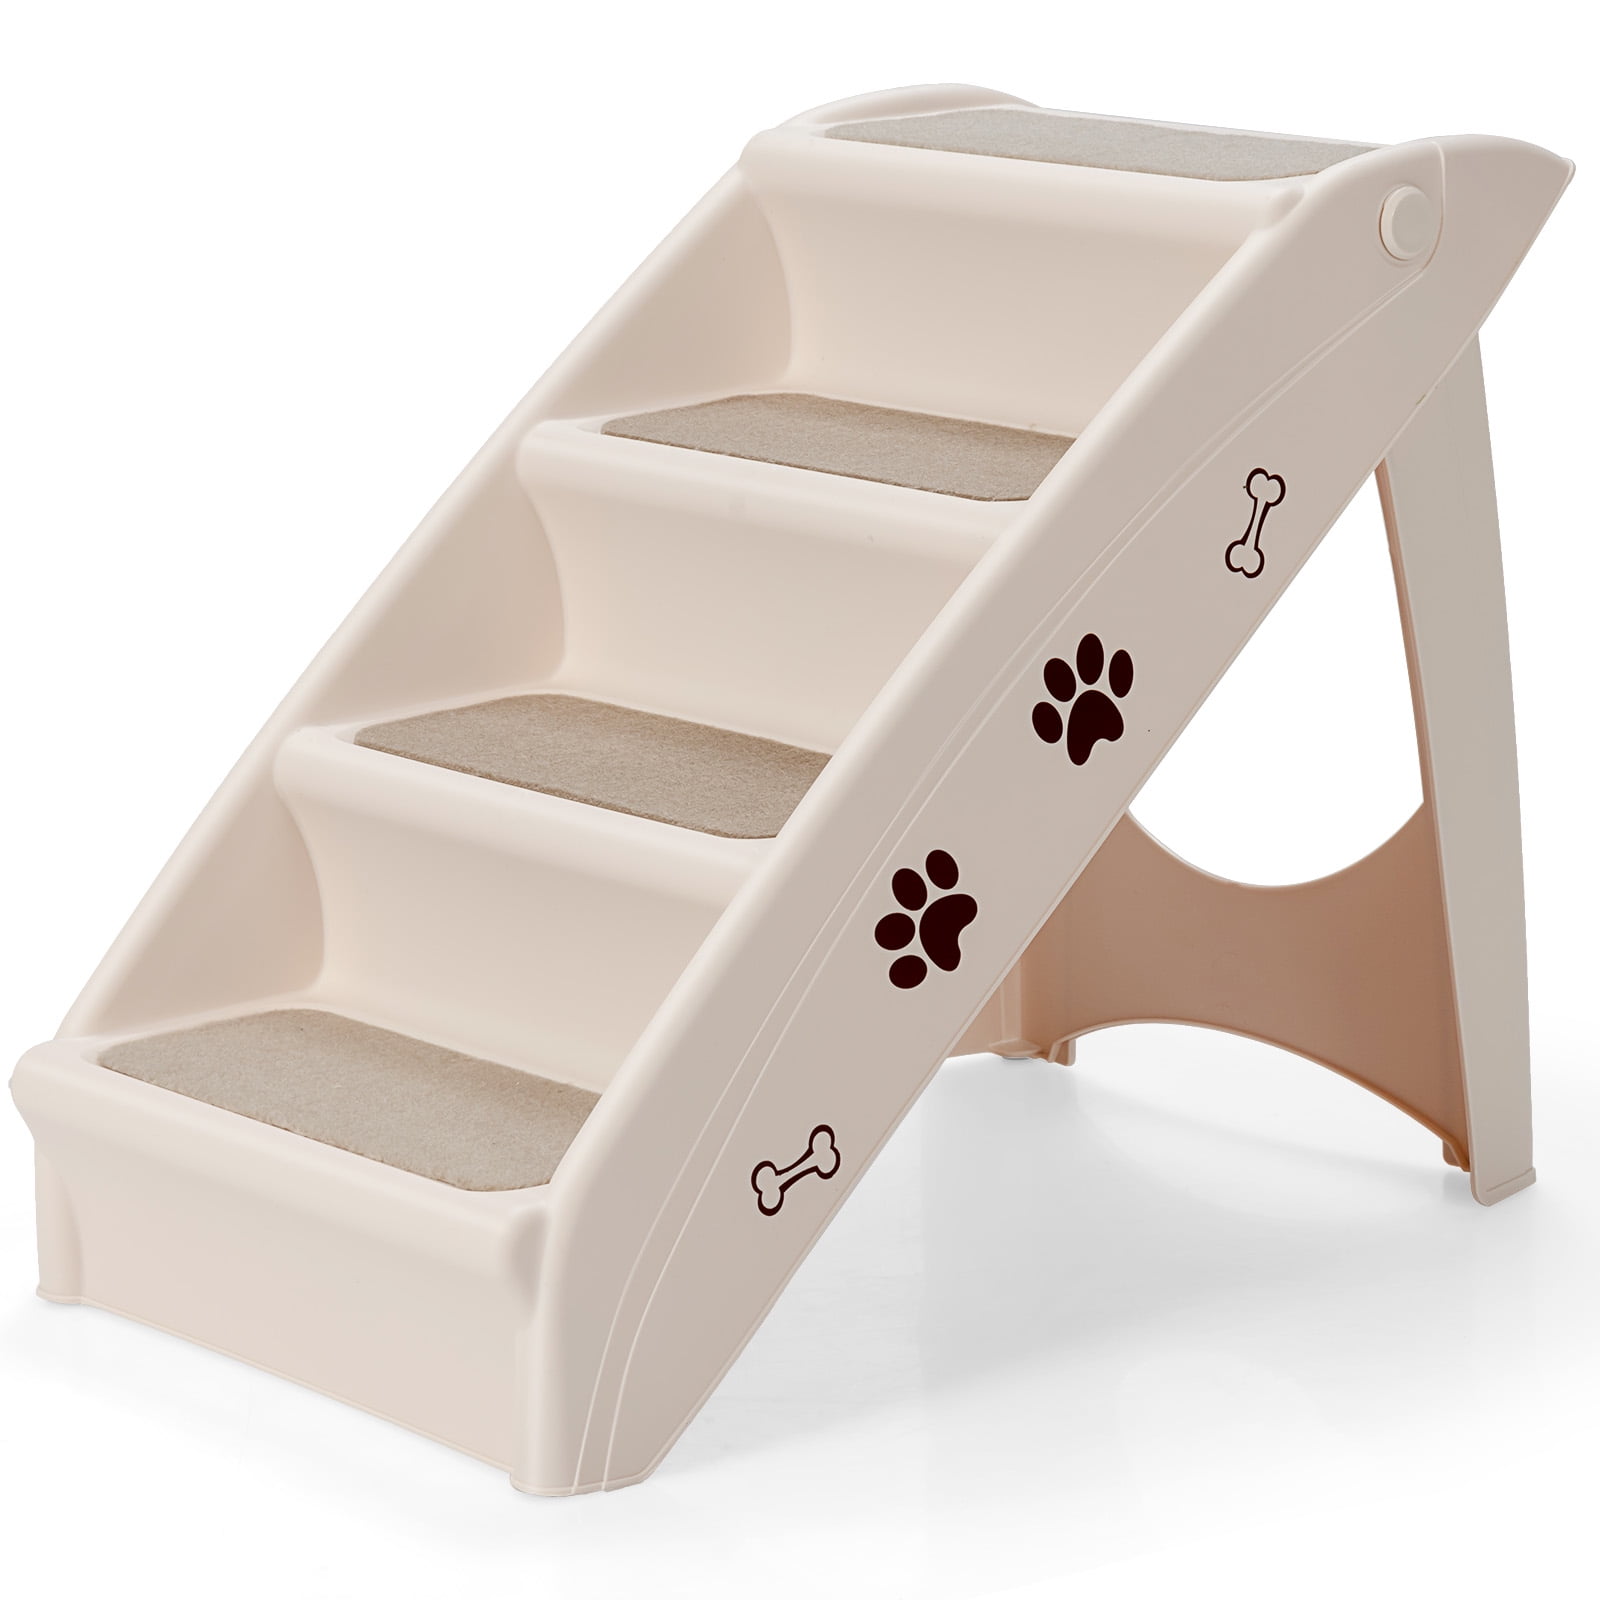 jaspenybow Pet Stairs Pet Steps/Stairs Dog Stairs to get on High Bed for Cat and Pet Pet Dog Stair Climbing Ladder Sponge Steps High Cat Dog Climb Ladder Steps at Home or Portable Travel